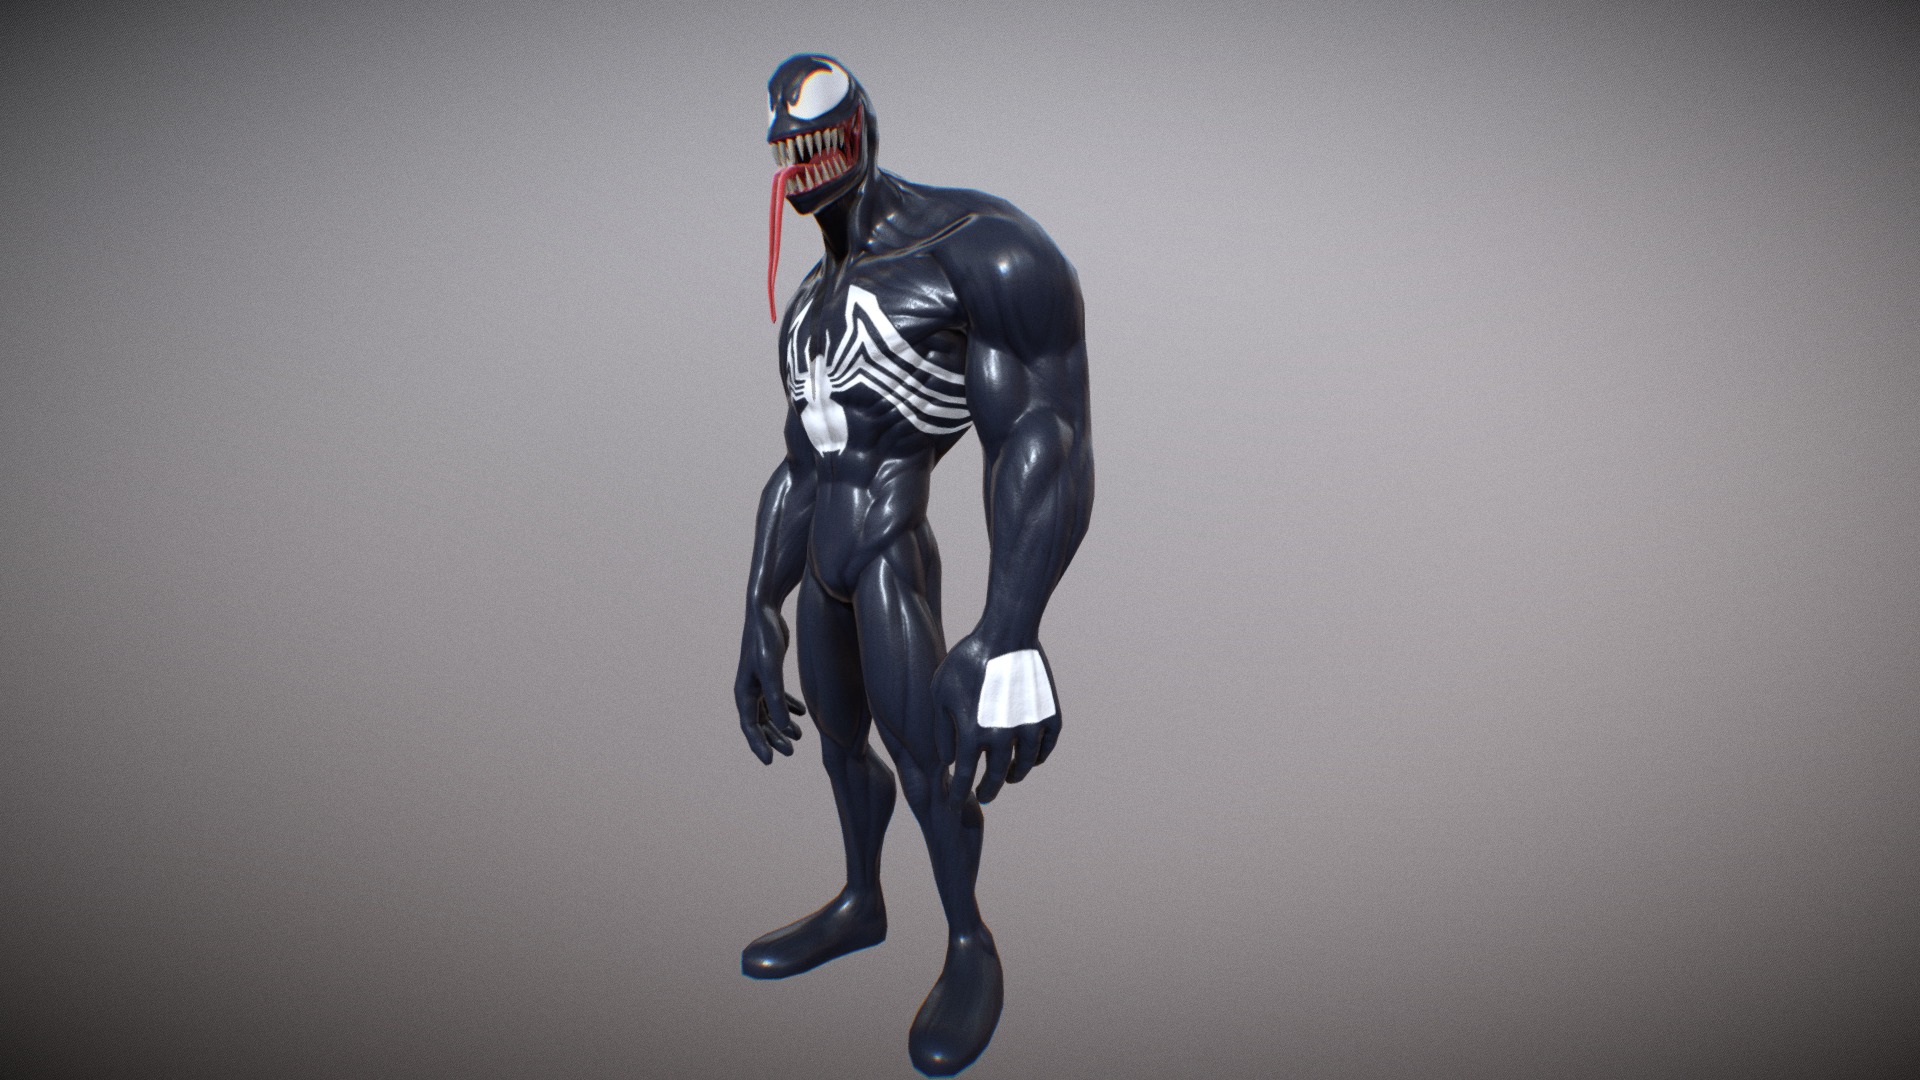 Recently I remembered that I have a Venom model I did after watching the movie about a month ago. 
So I textured the guy.

Model made by me in Zbrush and 3DSMax, textured in Photoshop and Substance Painter 3d model